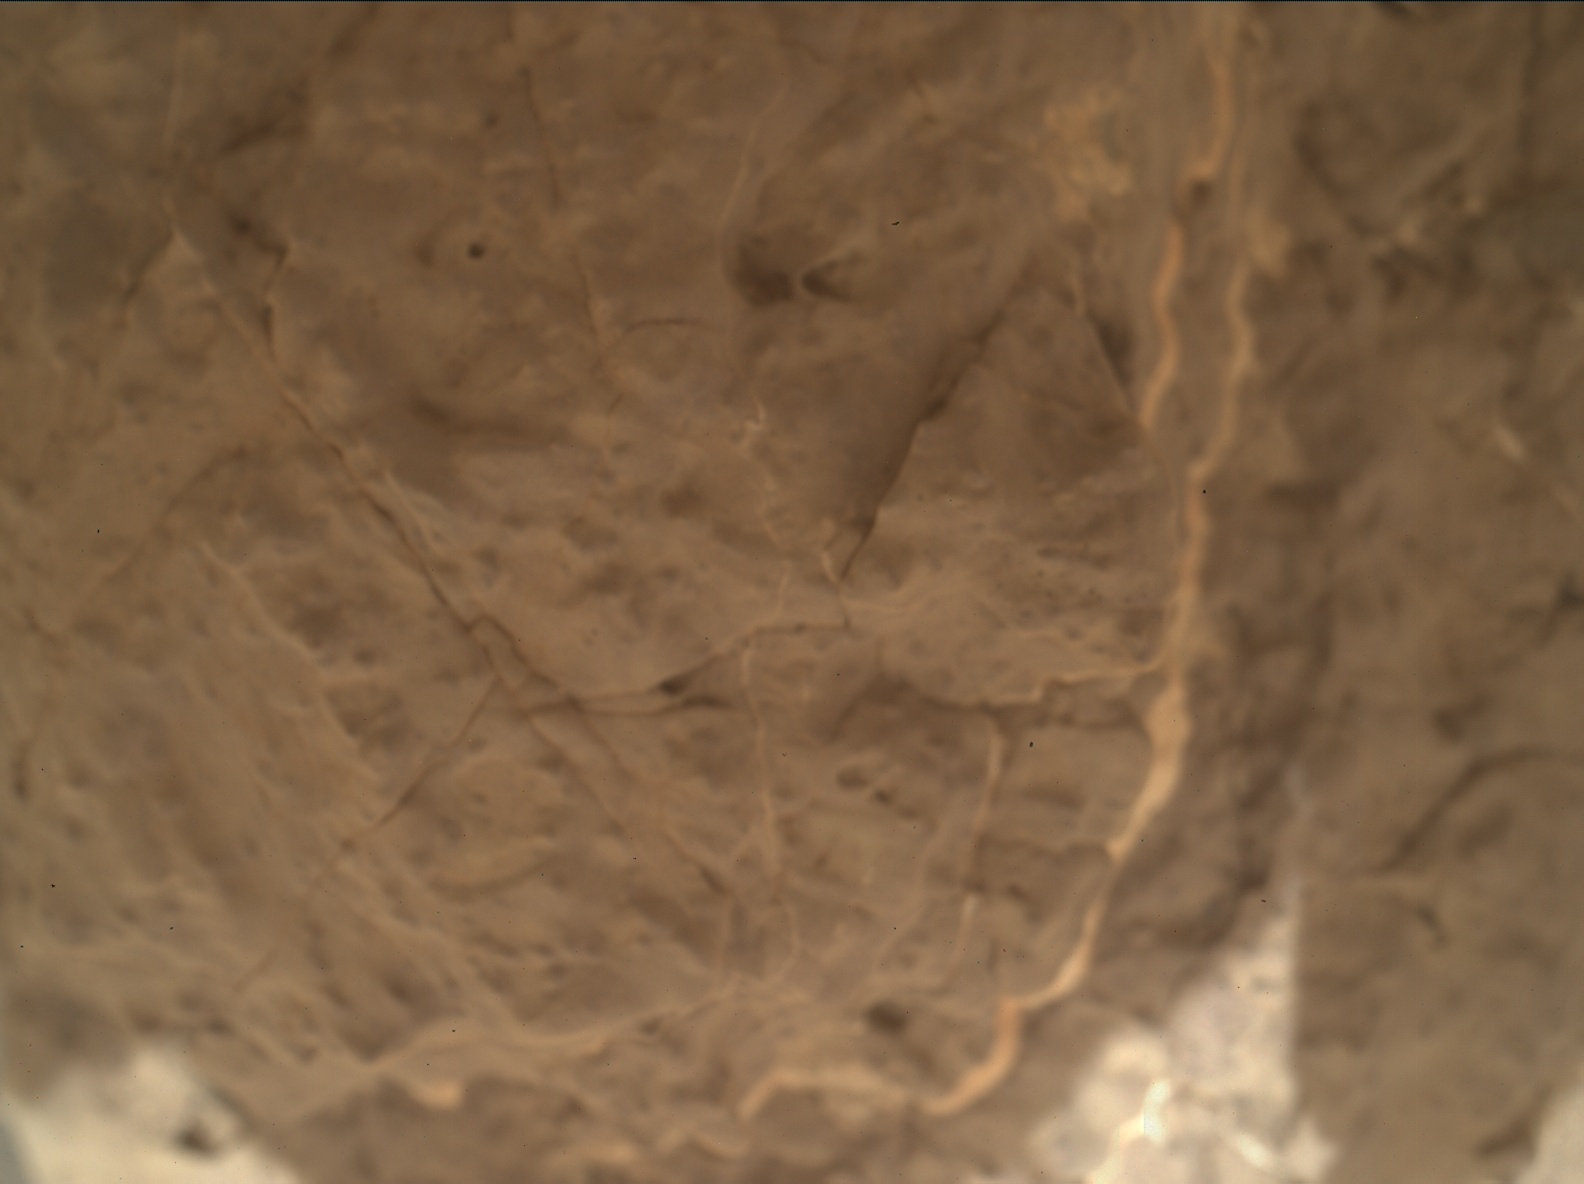 Nasa's Mars rover Curiosity acquired this image using its Mars Hand Lens Imager (MAHLI) on Sol 3028